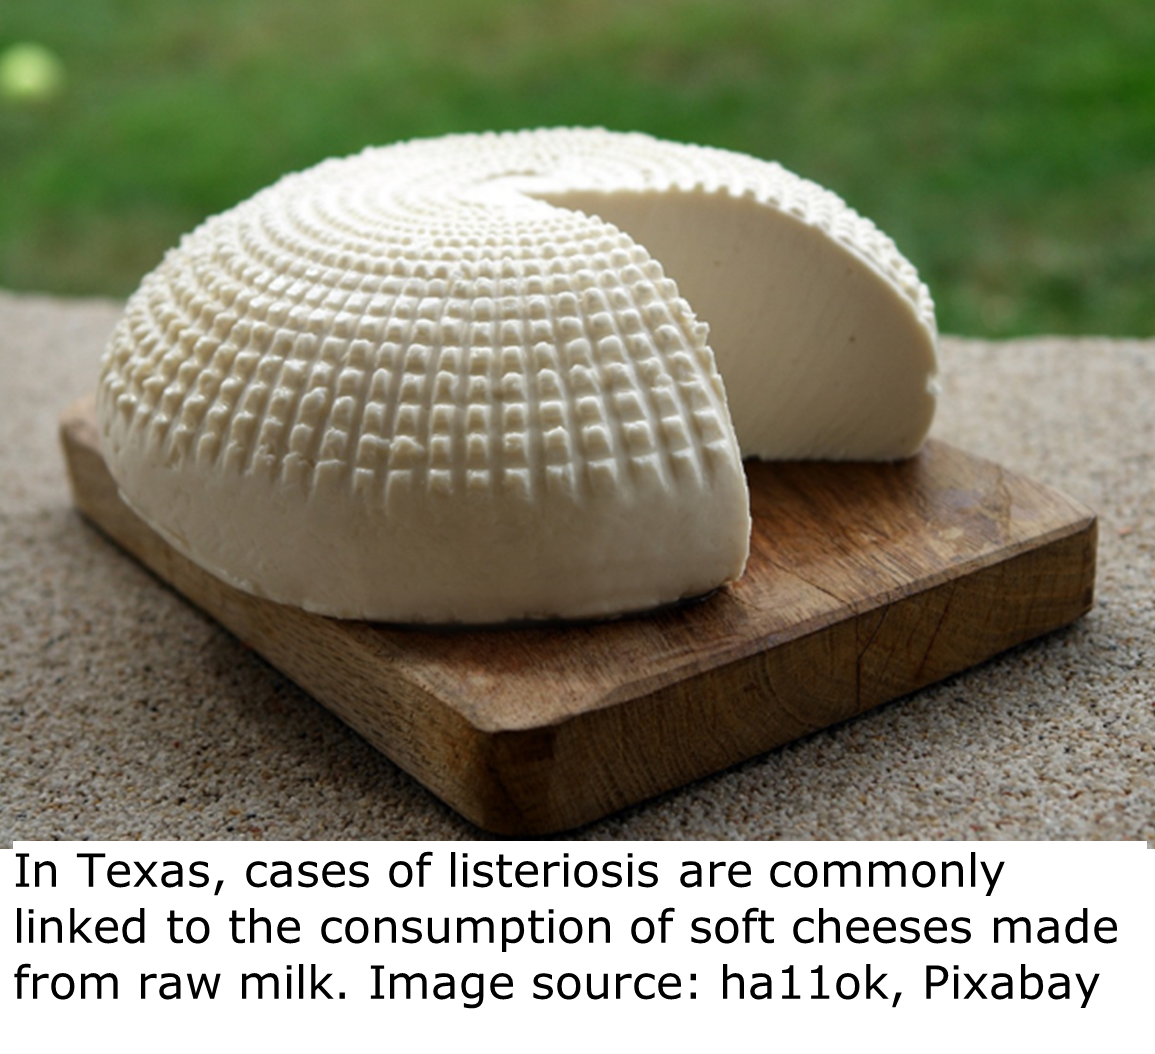 "A wheel of white cheese on a wooden board. A large slice has been removed from the wheel of cheese."